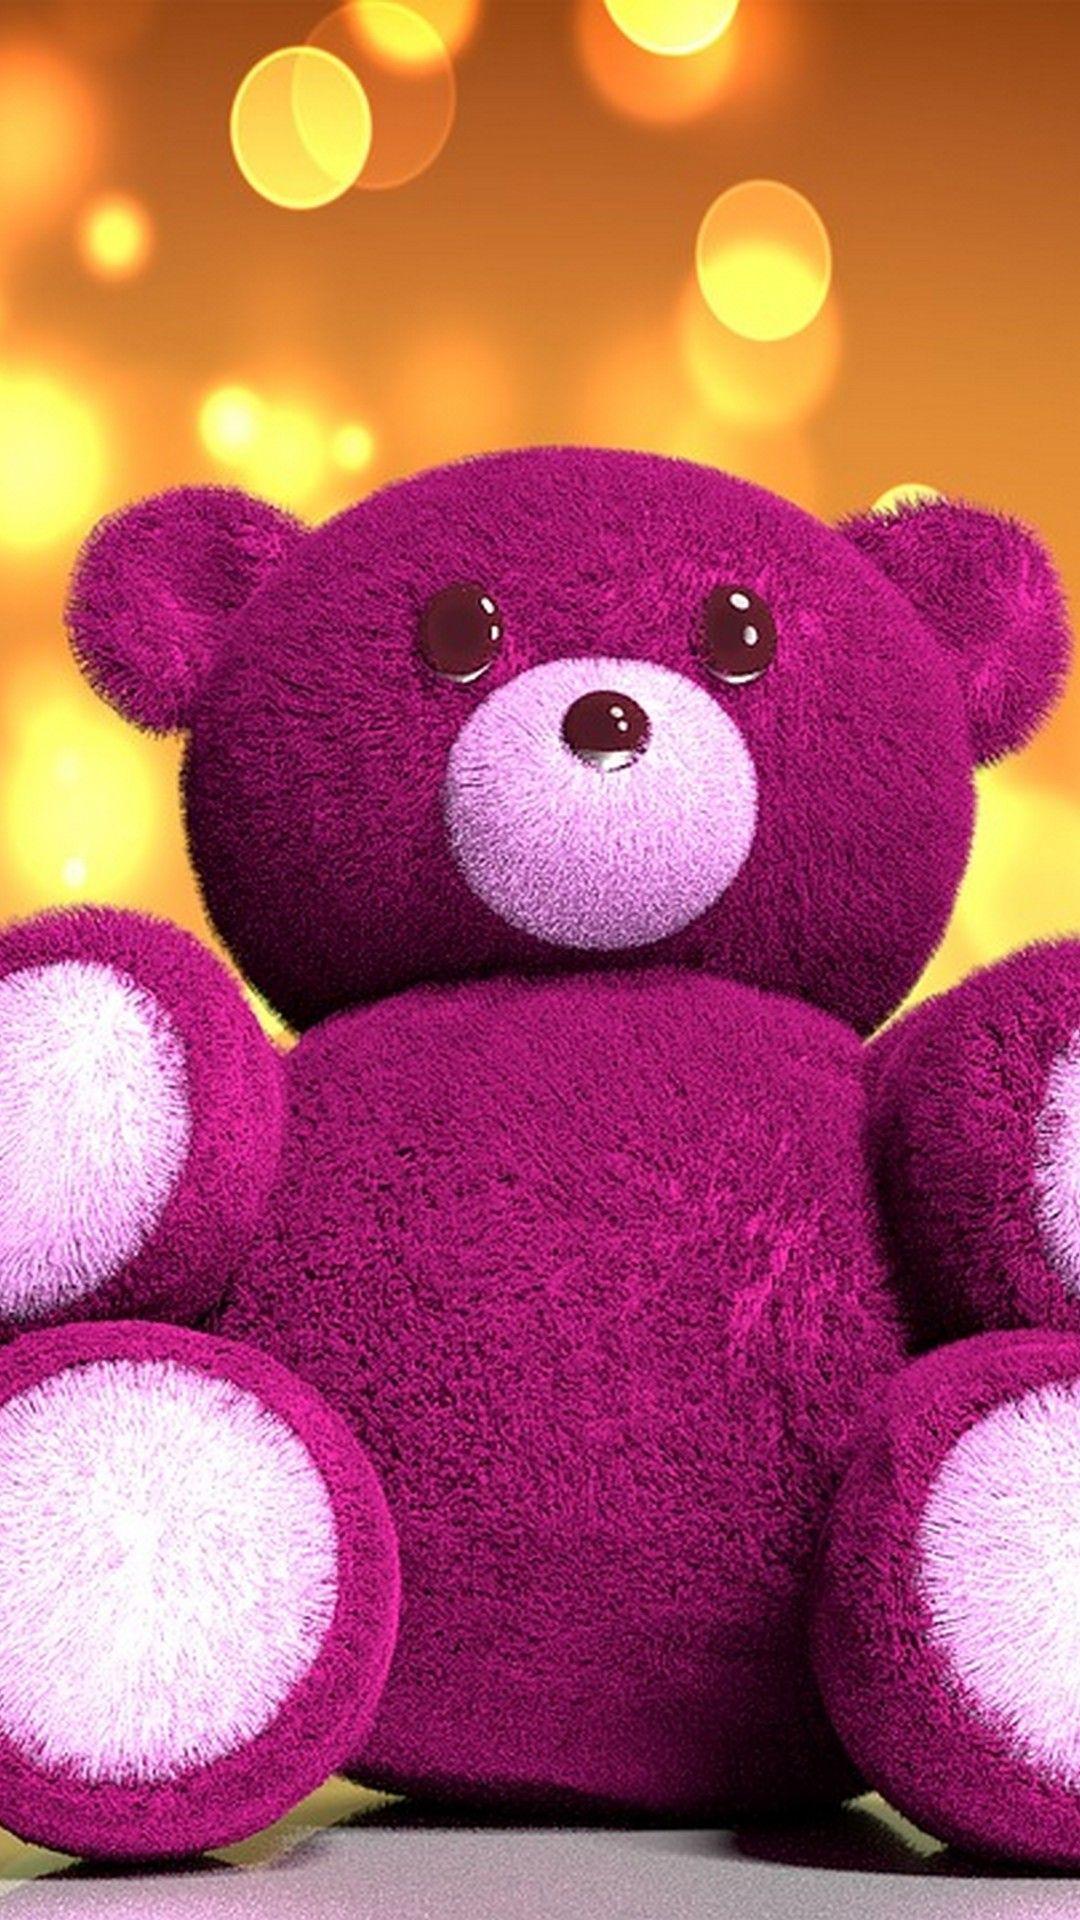 Teddy Bear Wallpapers Images Backgrounds Photos and Pictures